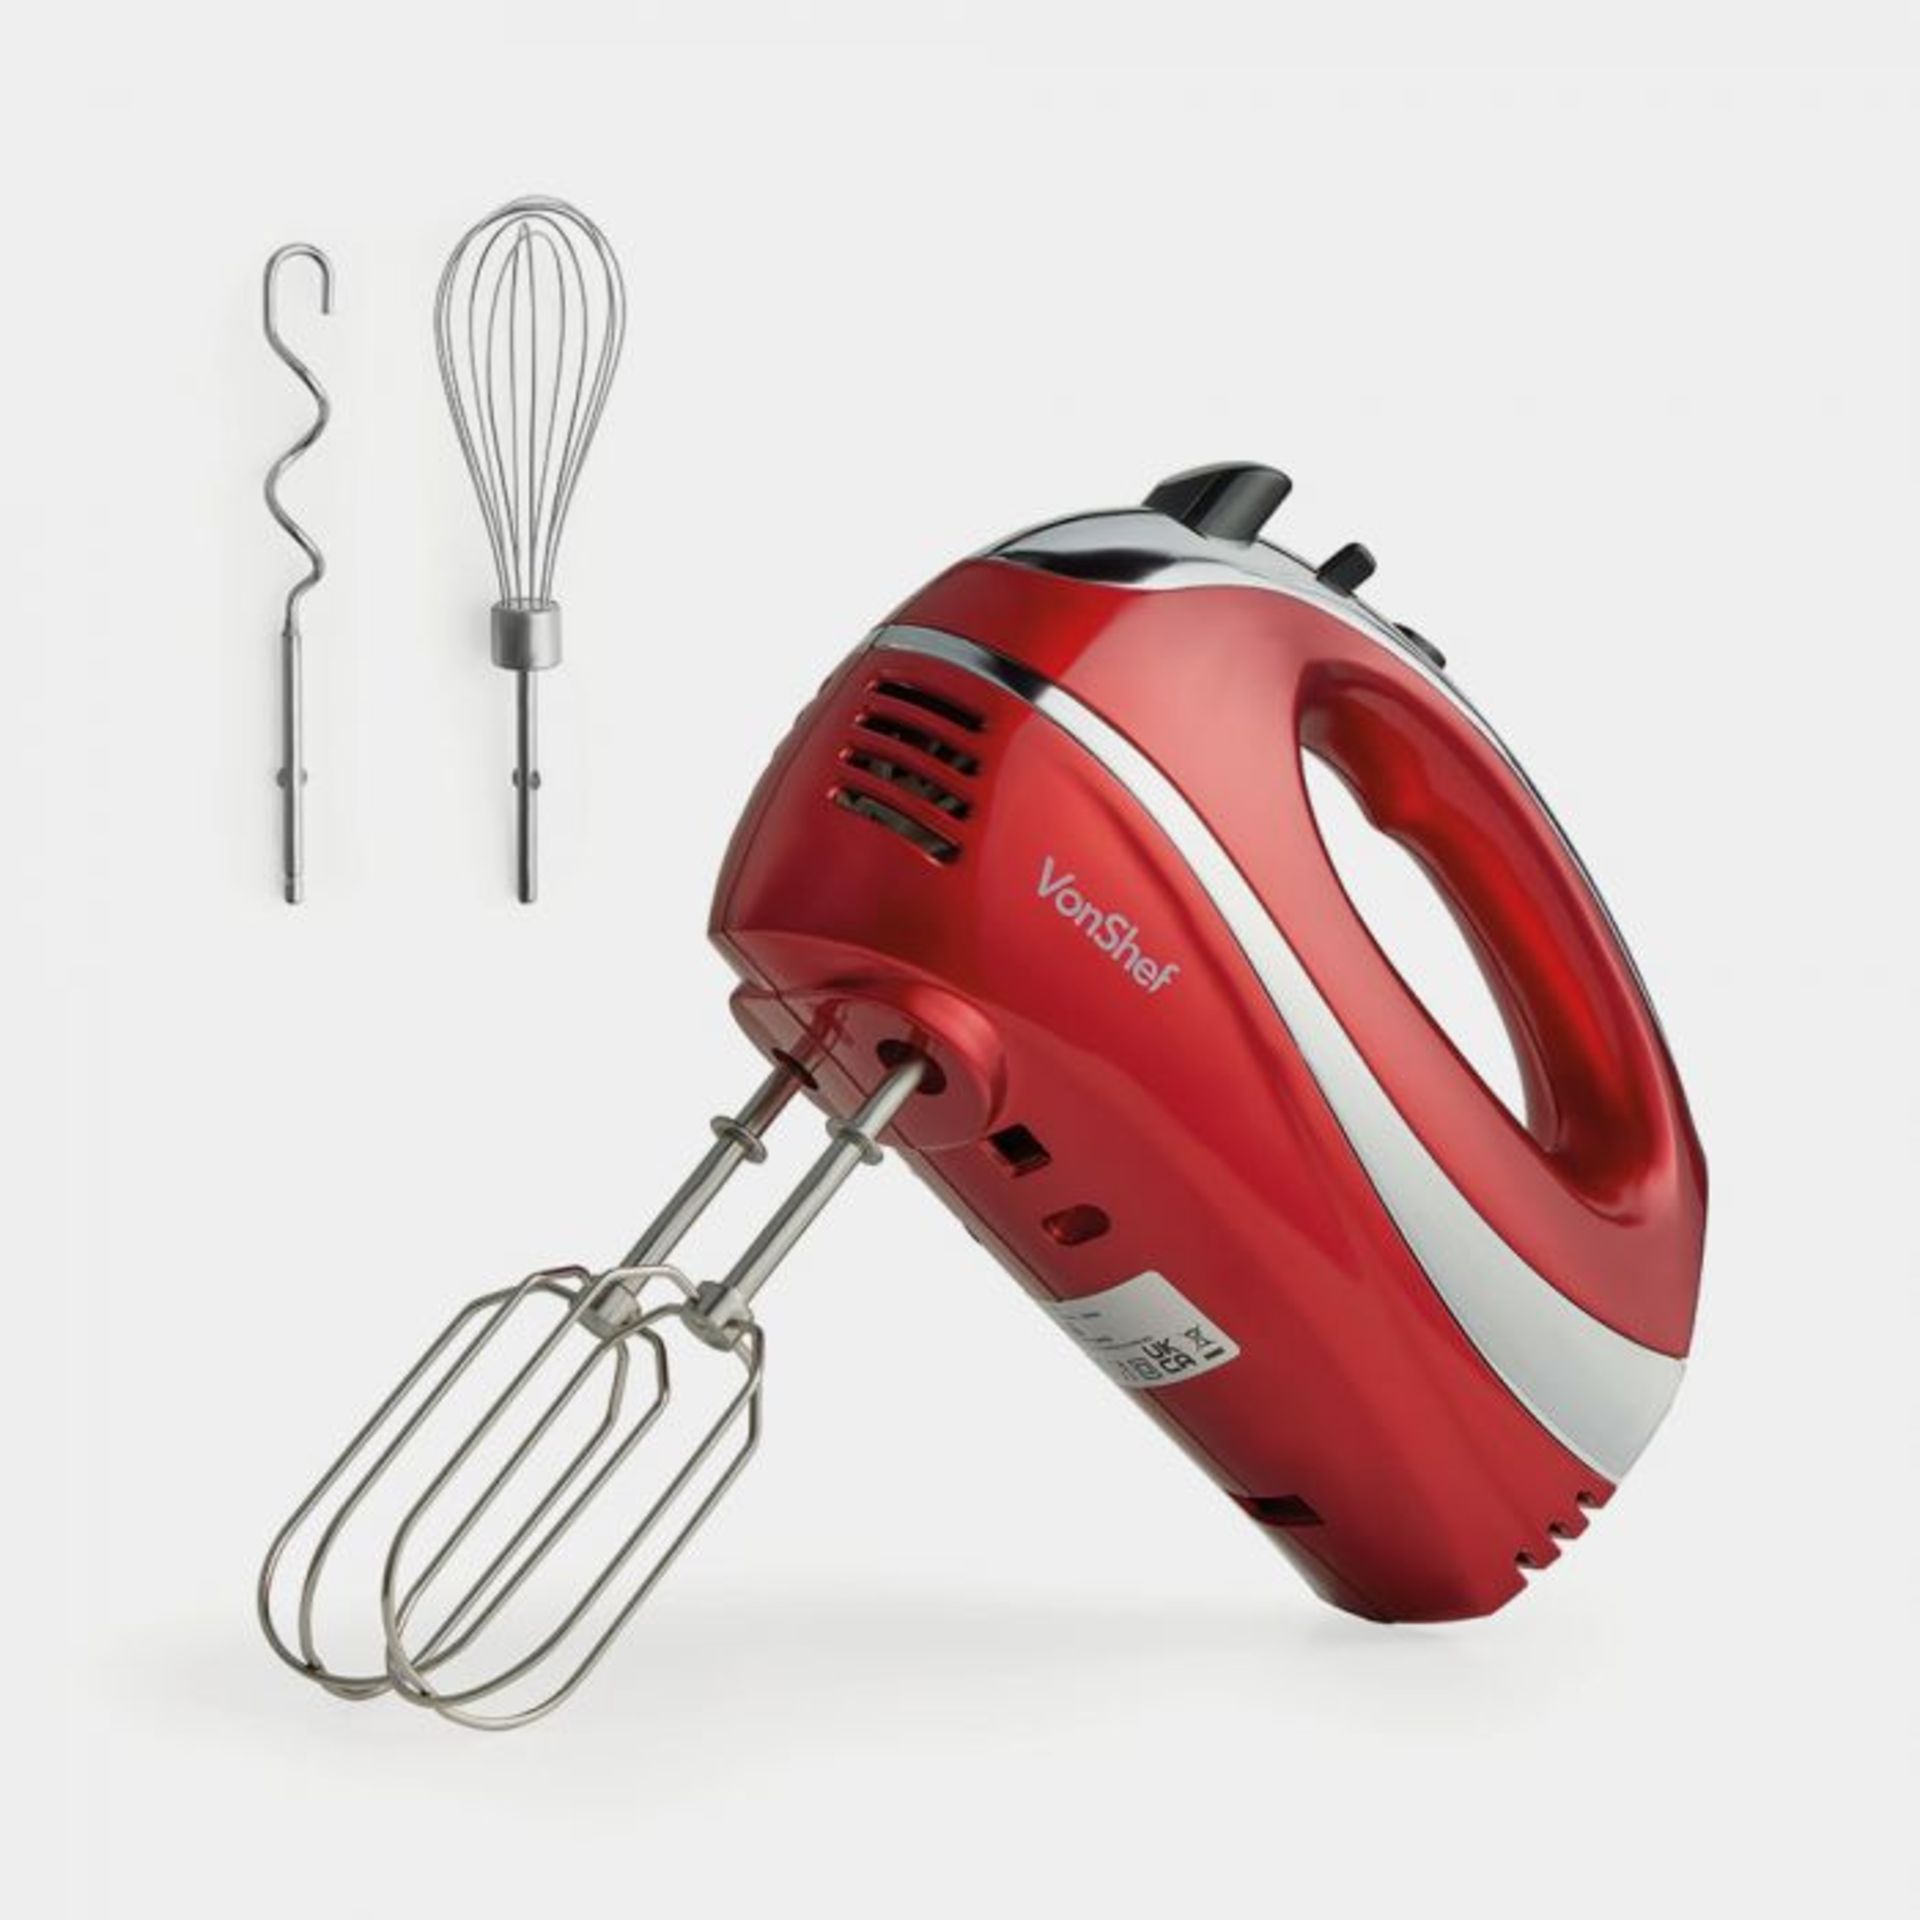 300W Red Hand Mixer.